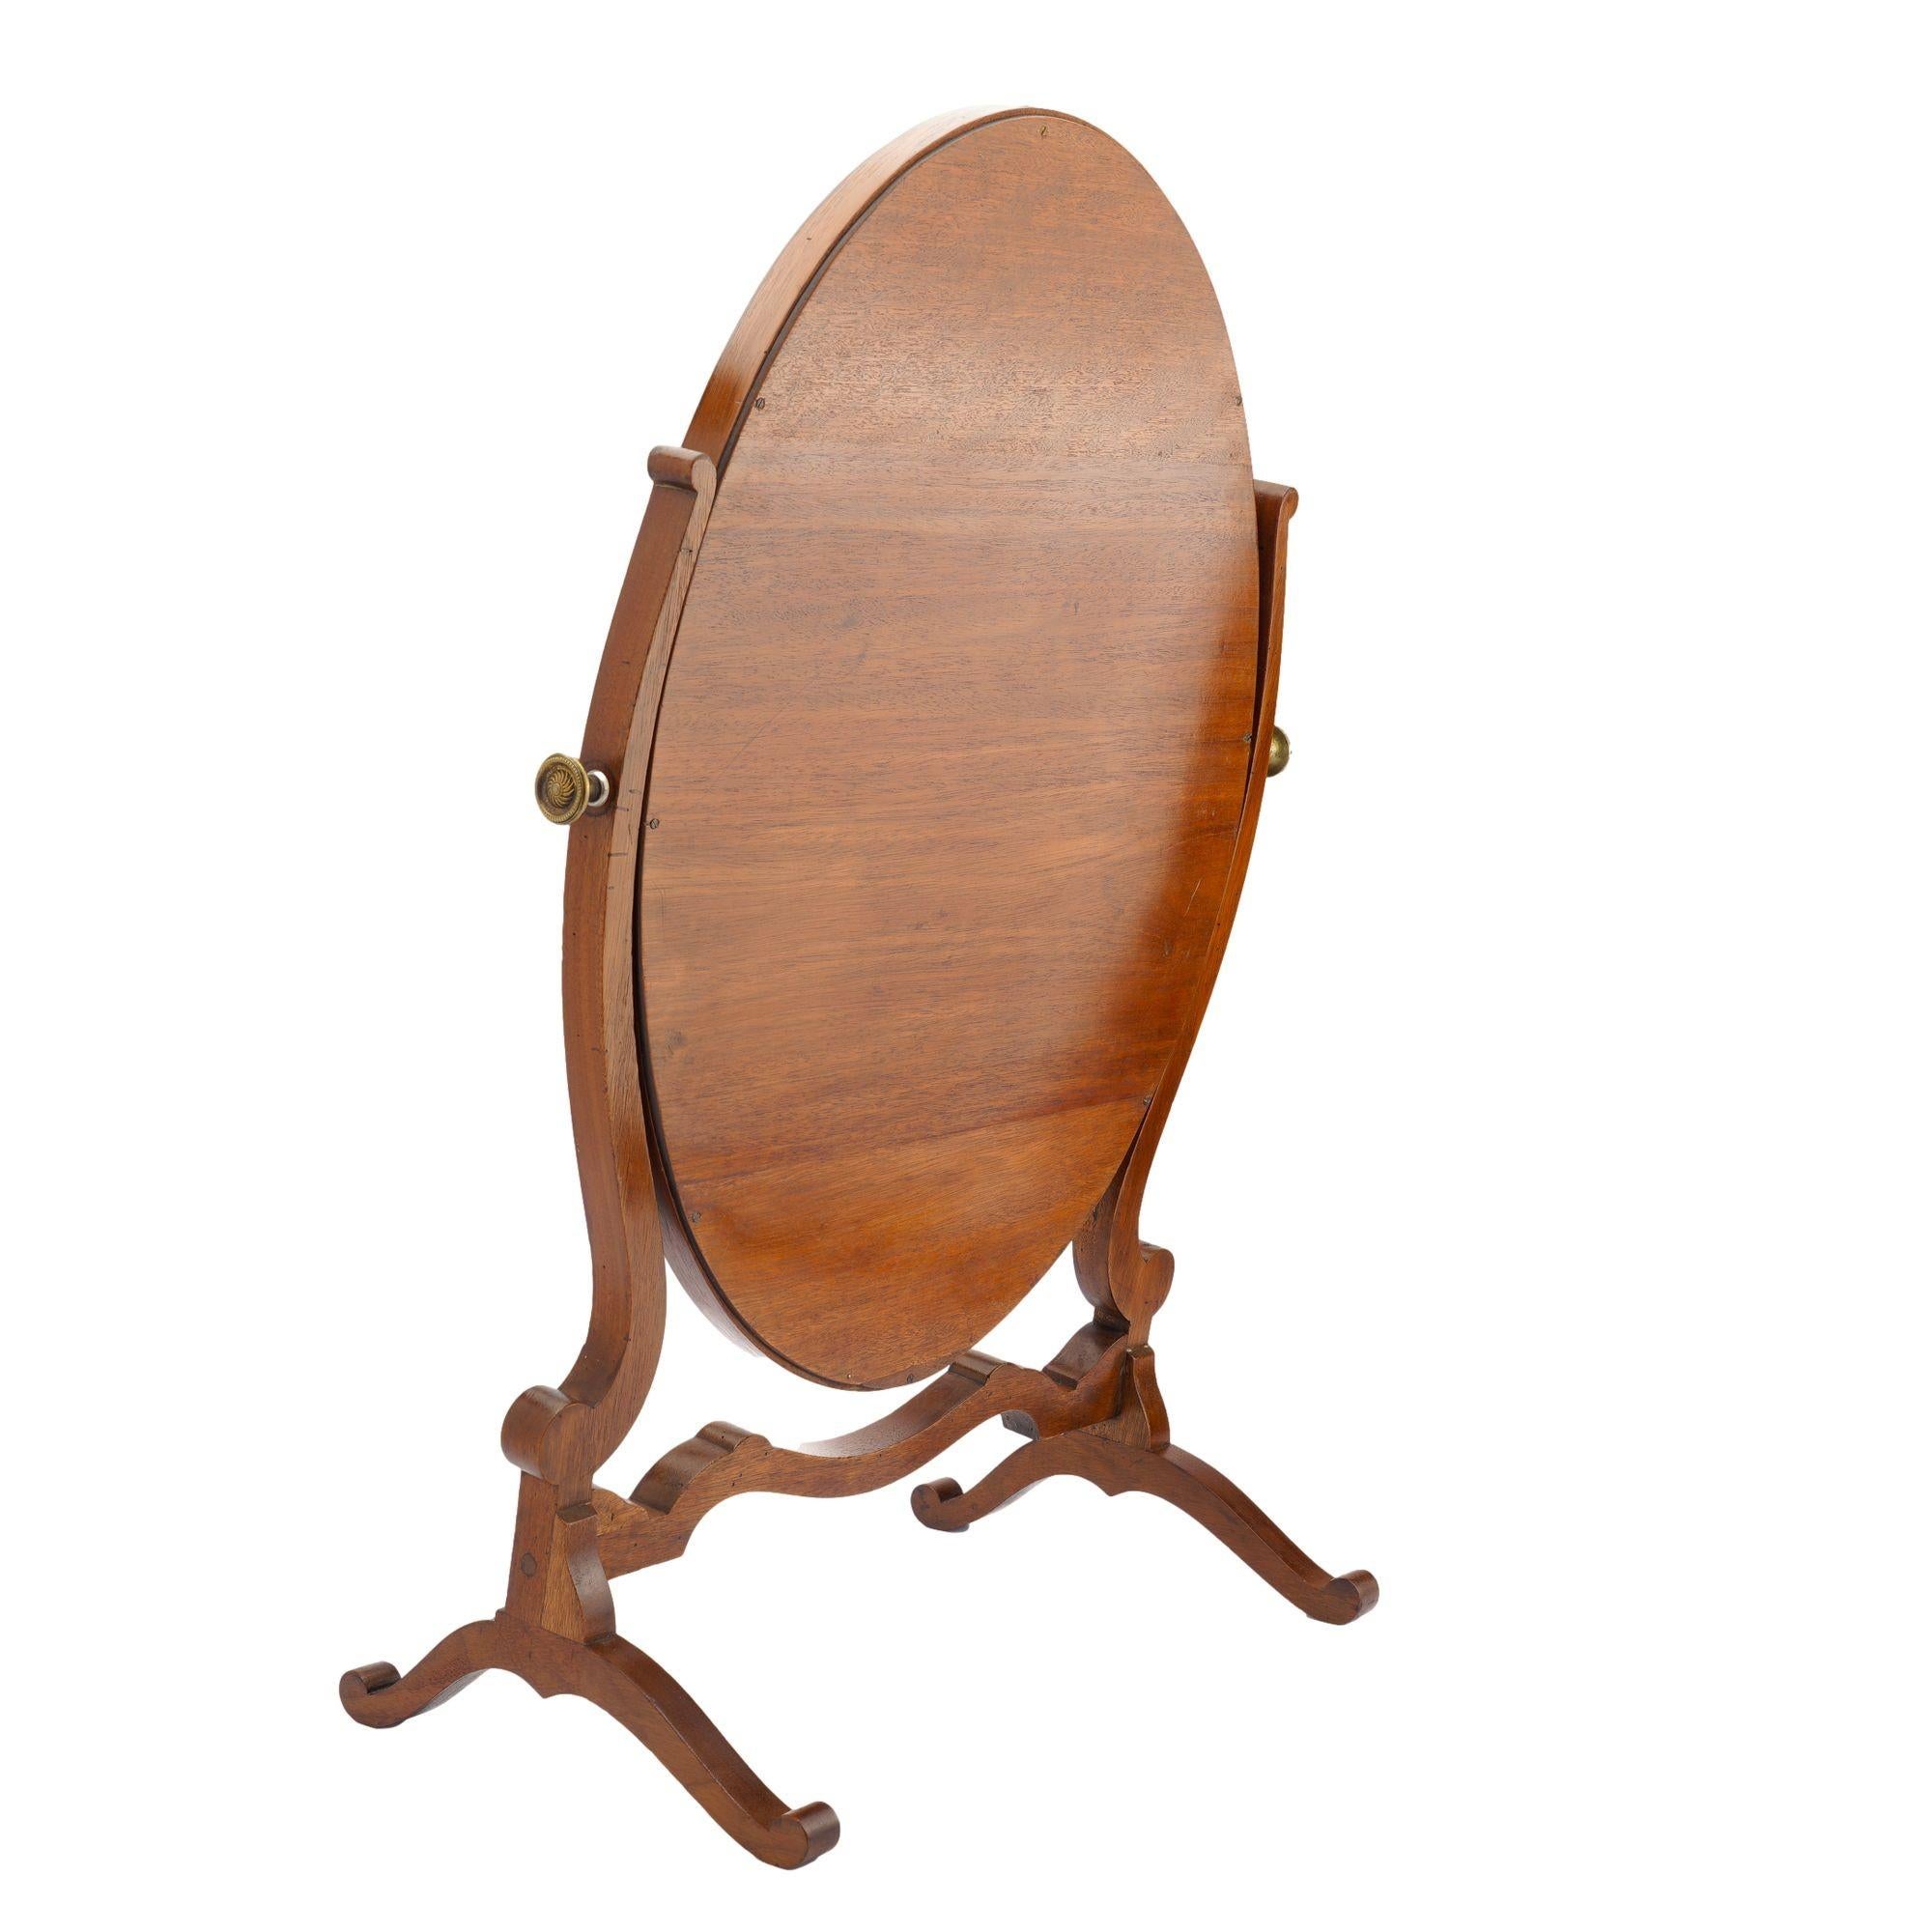 19th Century English oval swinger mirror on stand, 1800-25 For Sale